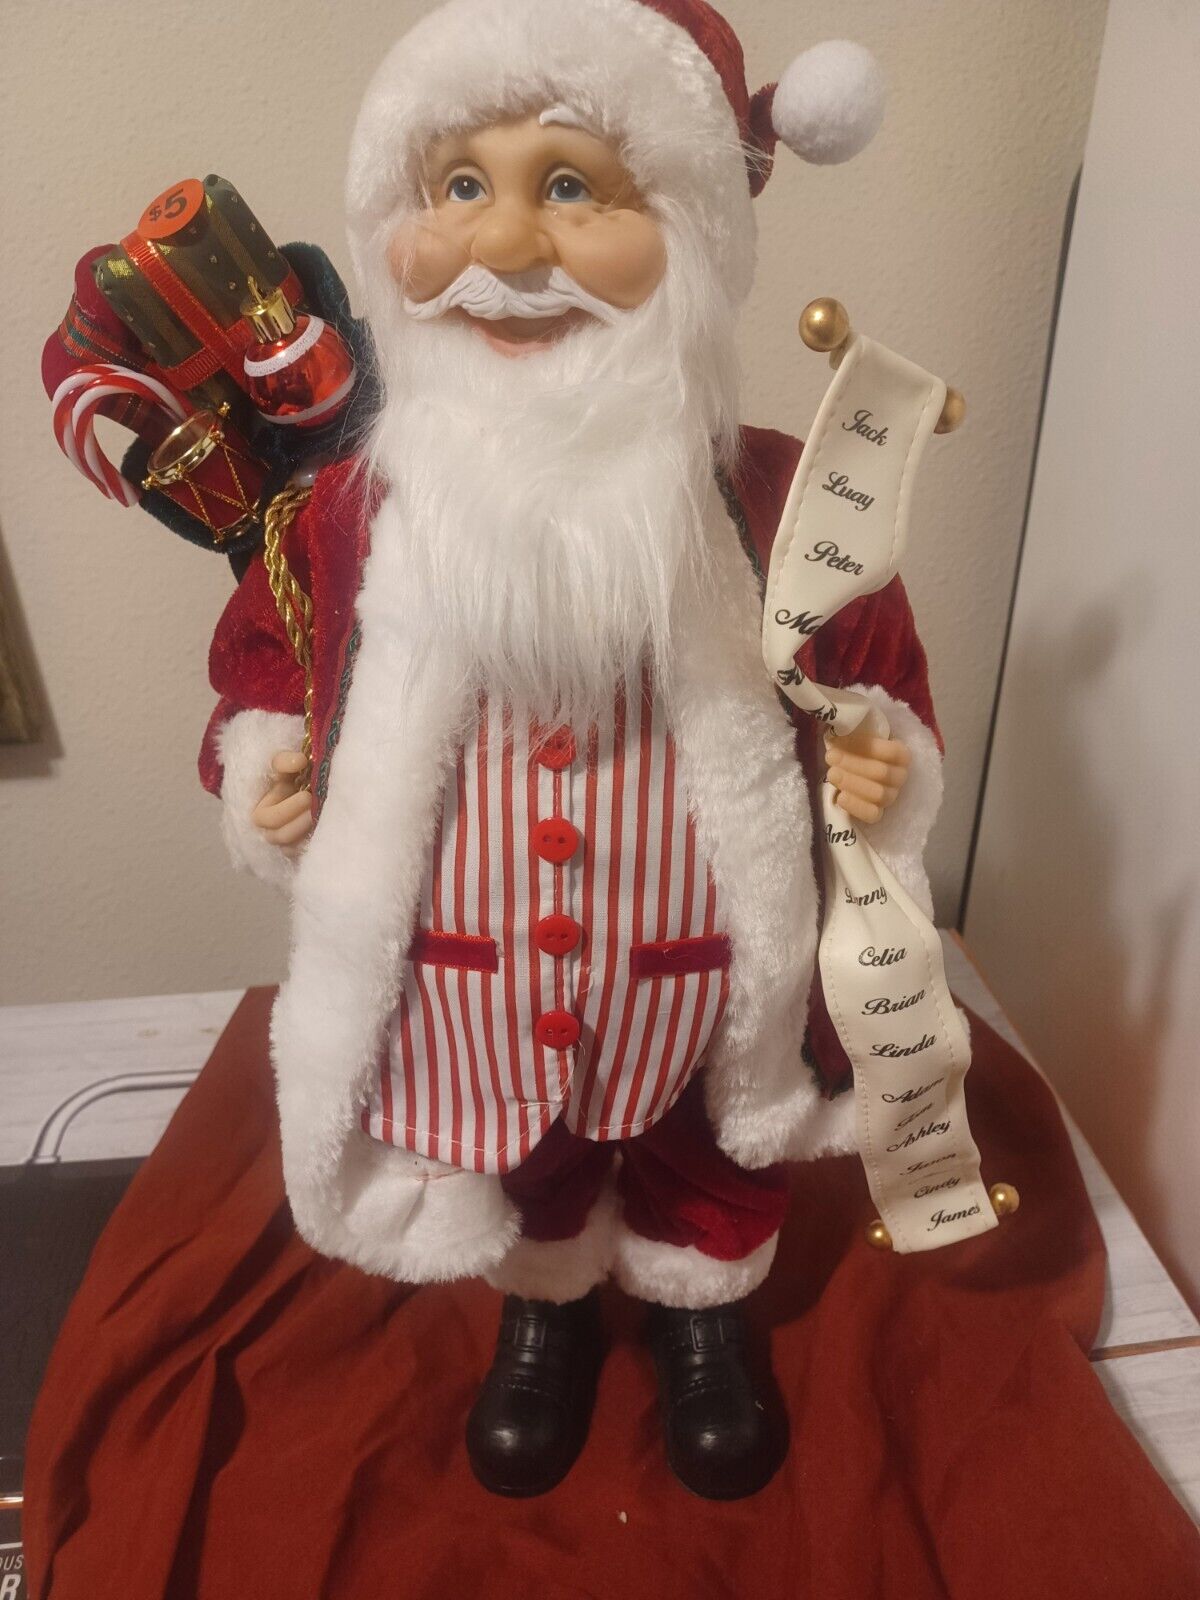 Santa Clause with a sack of toys (Great Condition)